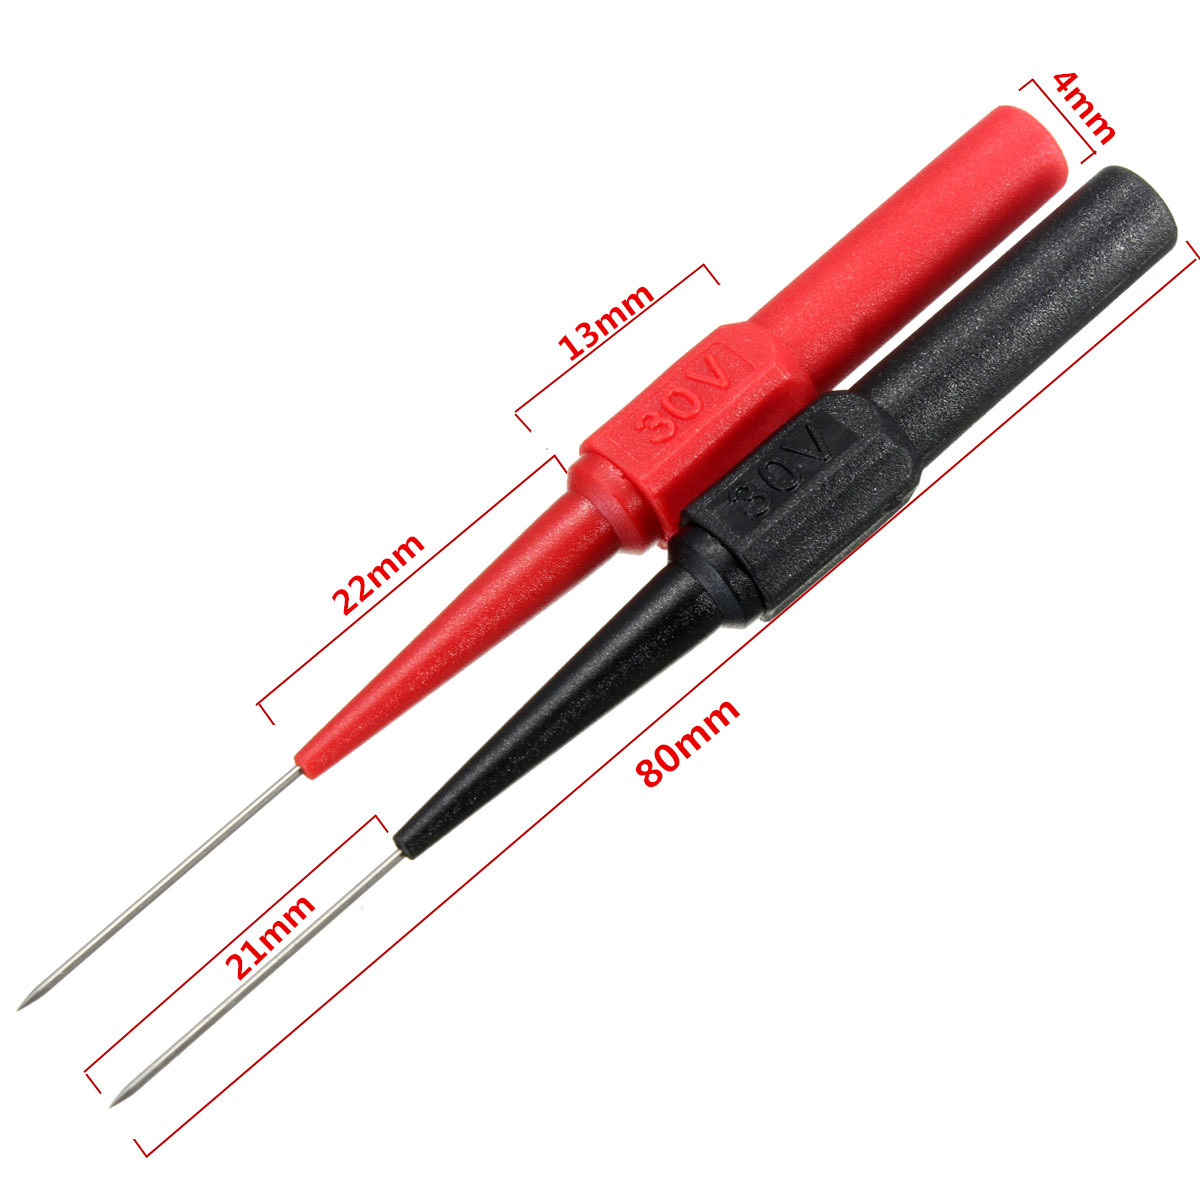 Quick Piercing Test Needle Practical Quick Piercing Test Probe Lightweight Compact Portable for Electrical Test Industrial Test